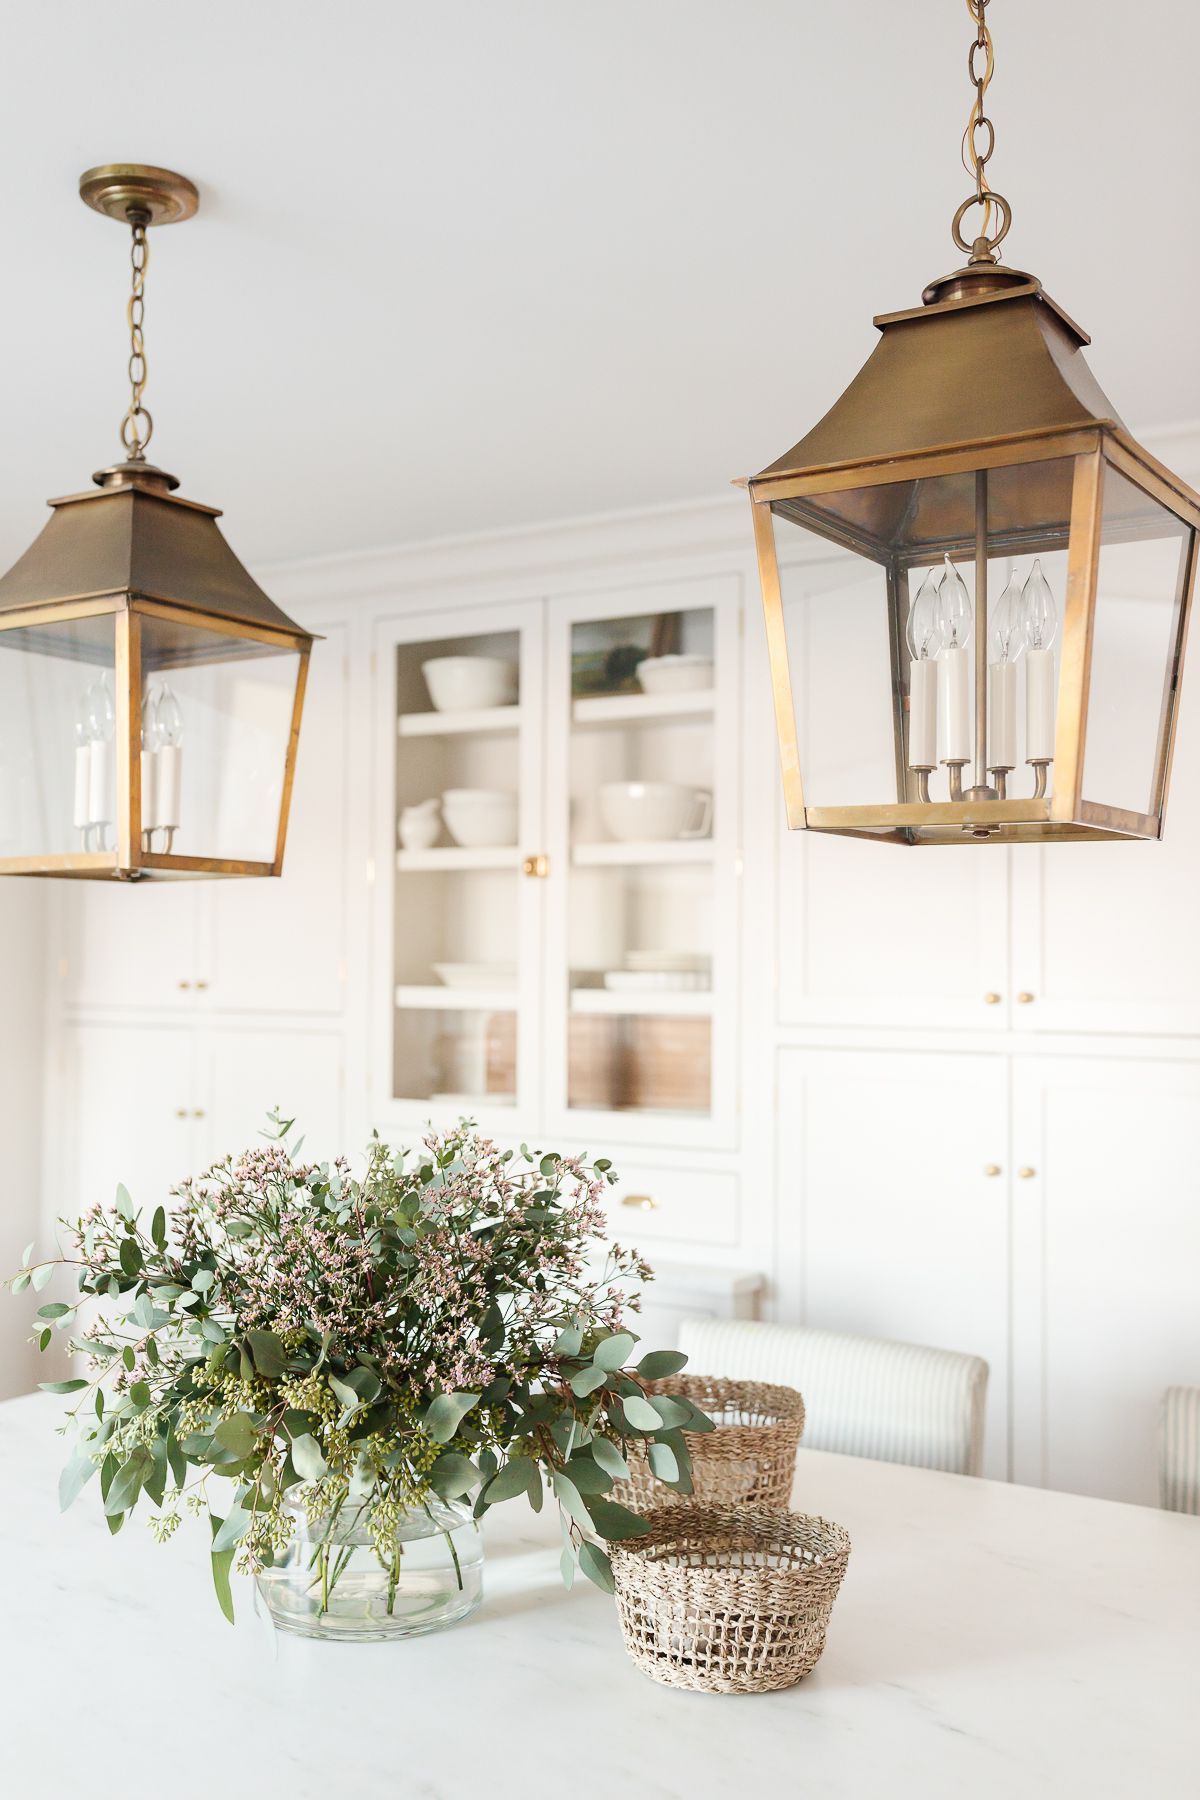 Well Known Brass Lantern Chandeliers Intended For Brass Lantern Pendant Lights (View 1 of 15)